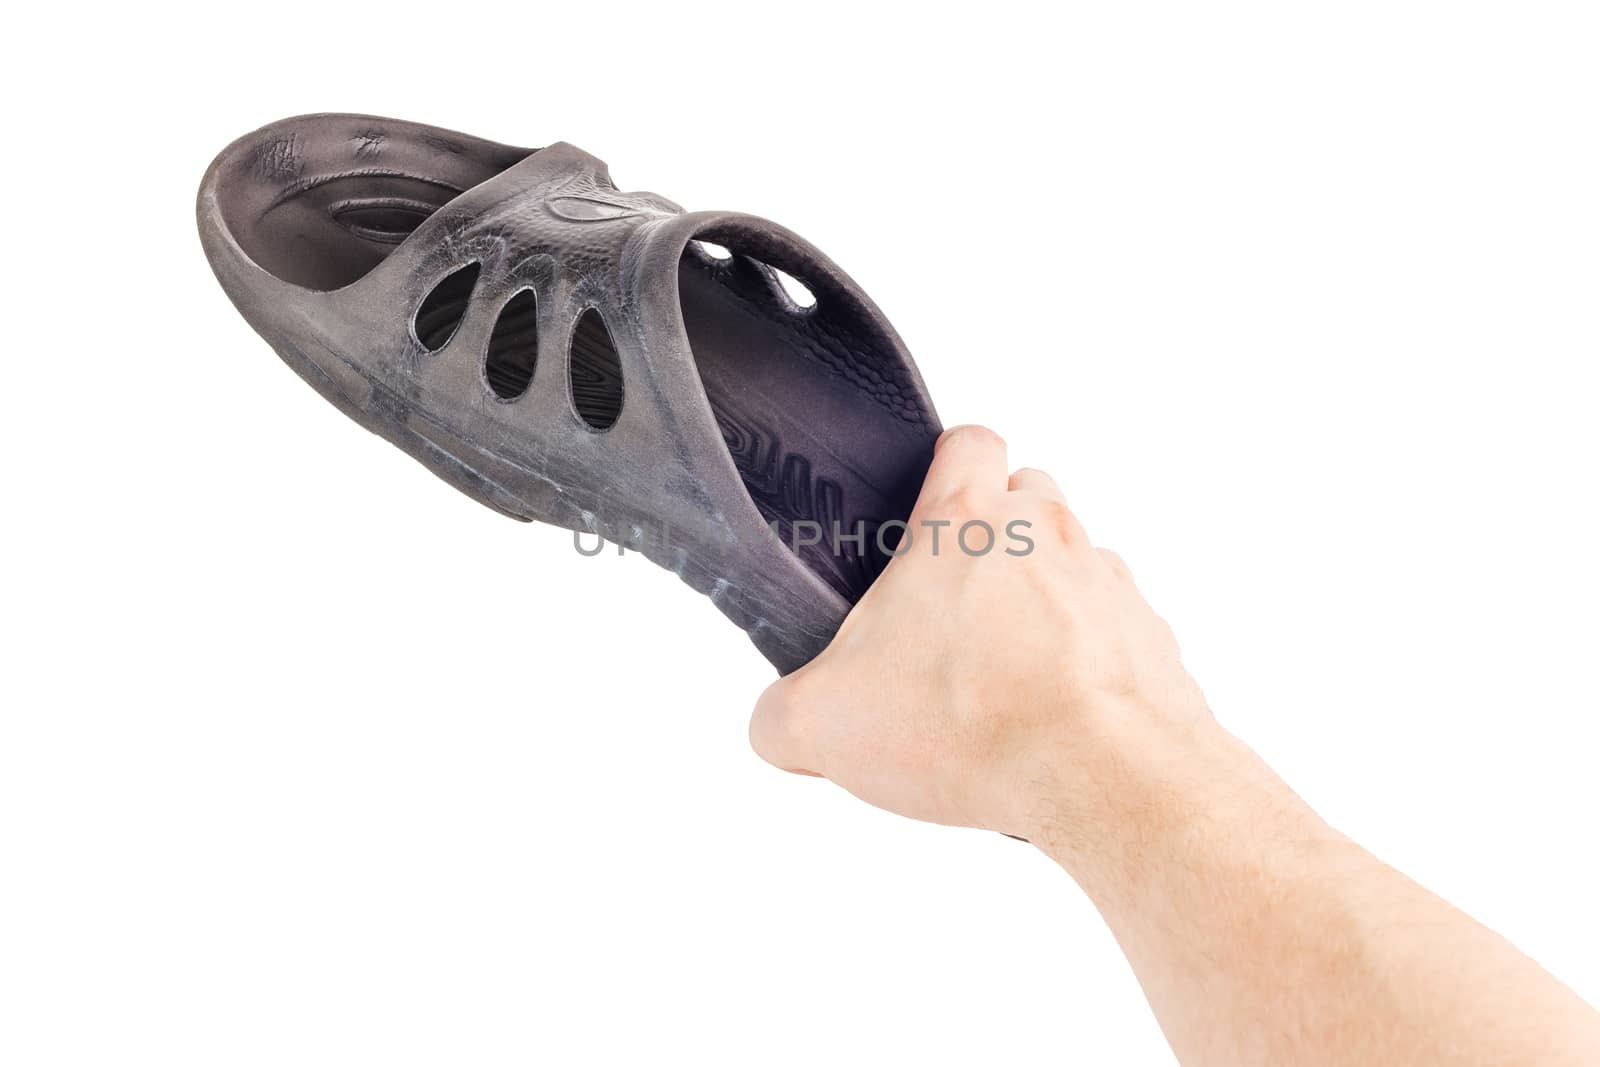 caucasian hand holding black rubber slipper like weapon against cockroach by z1b